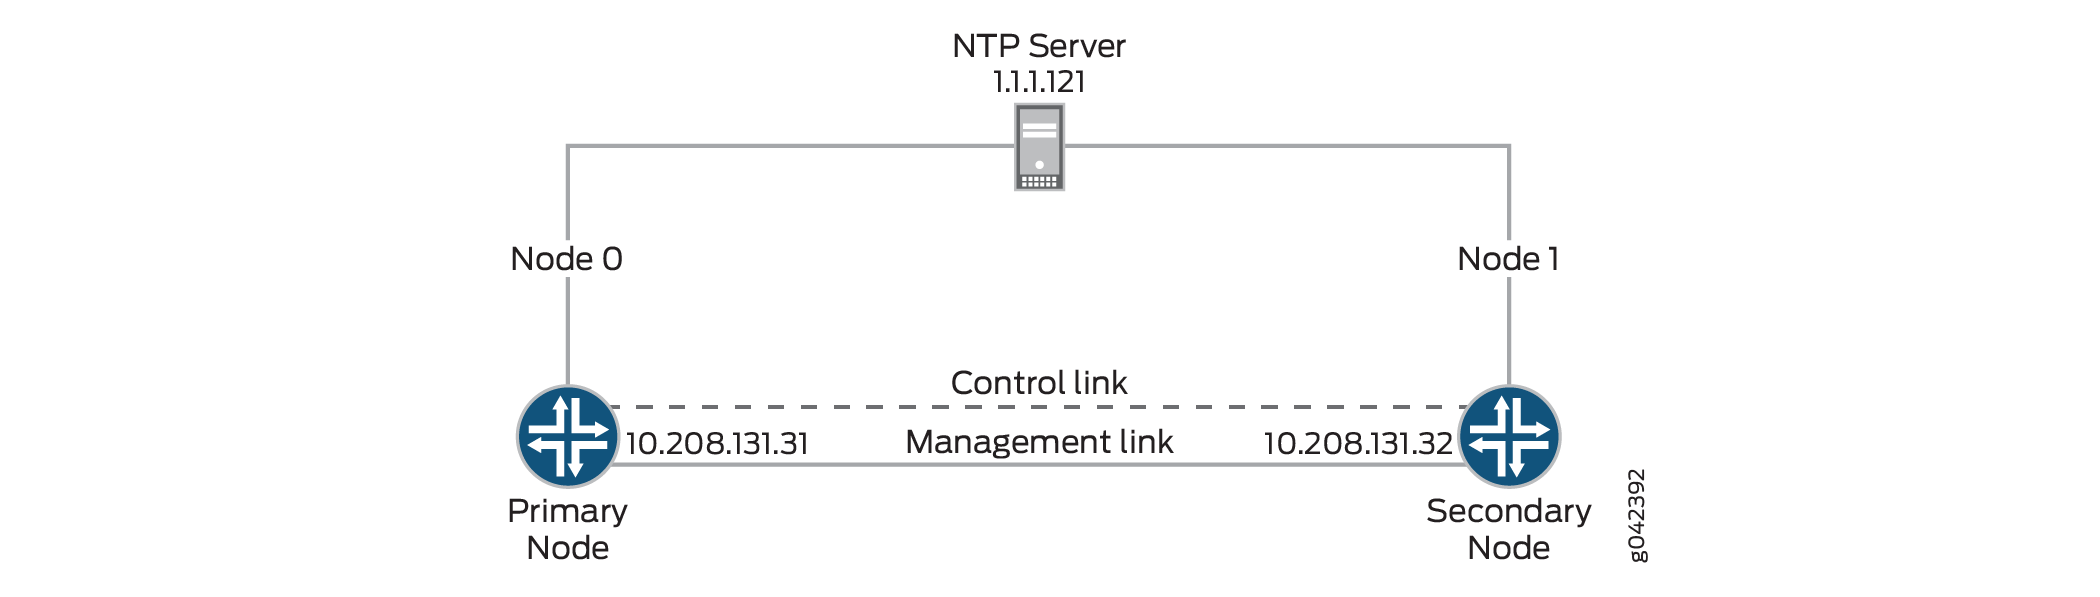 Synchronizing Time From Peer Node Through Control Link